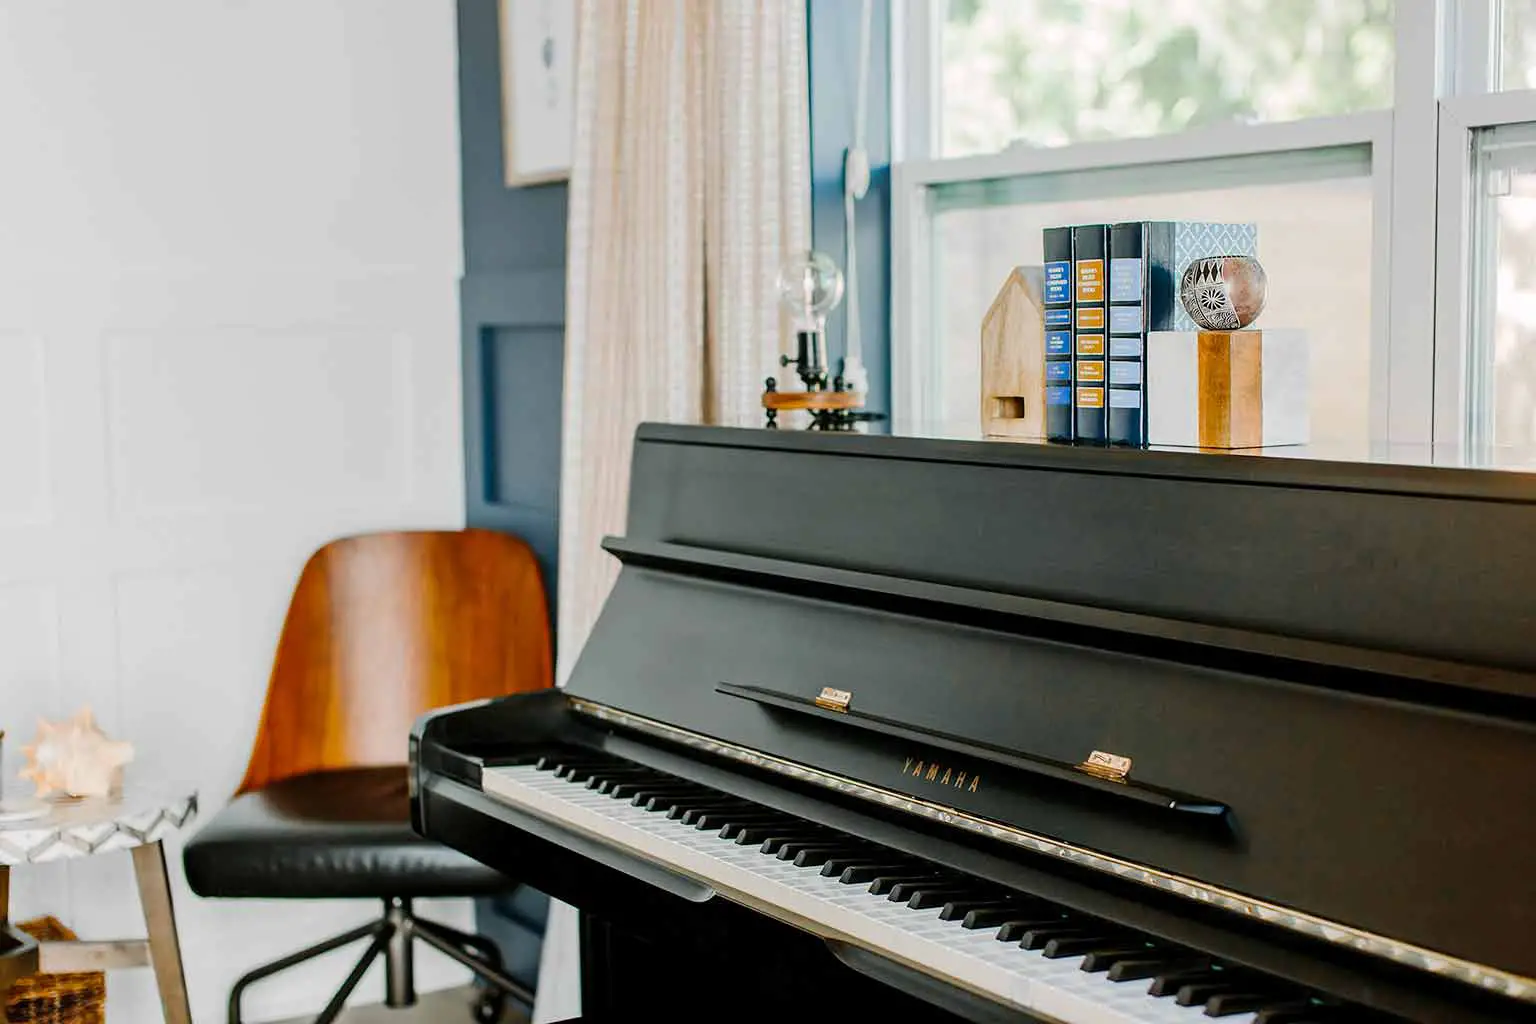 Yamaha upright piano - The Guest House Reveal - That Homebird Life Blog